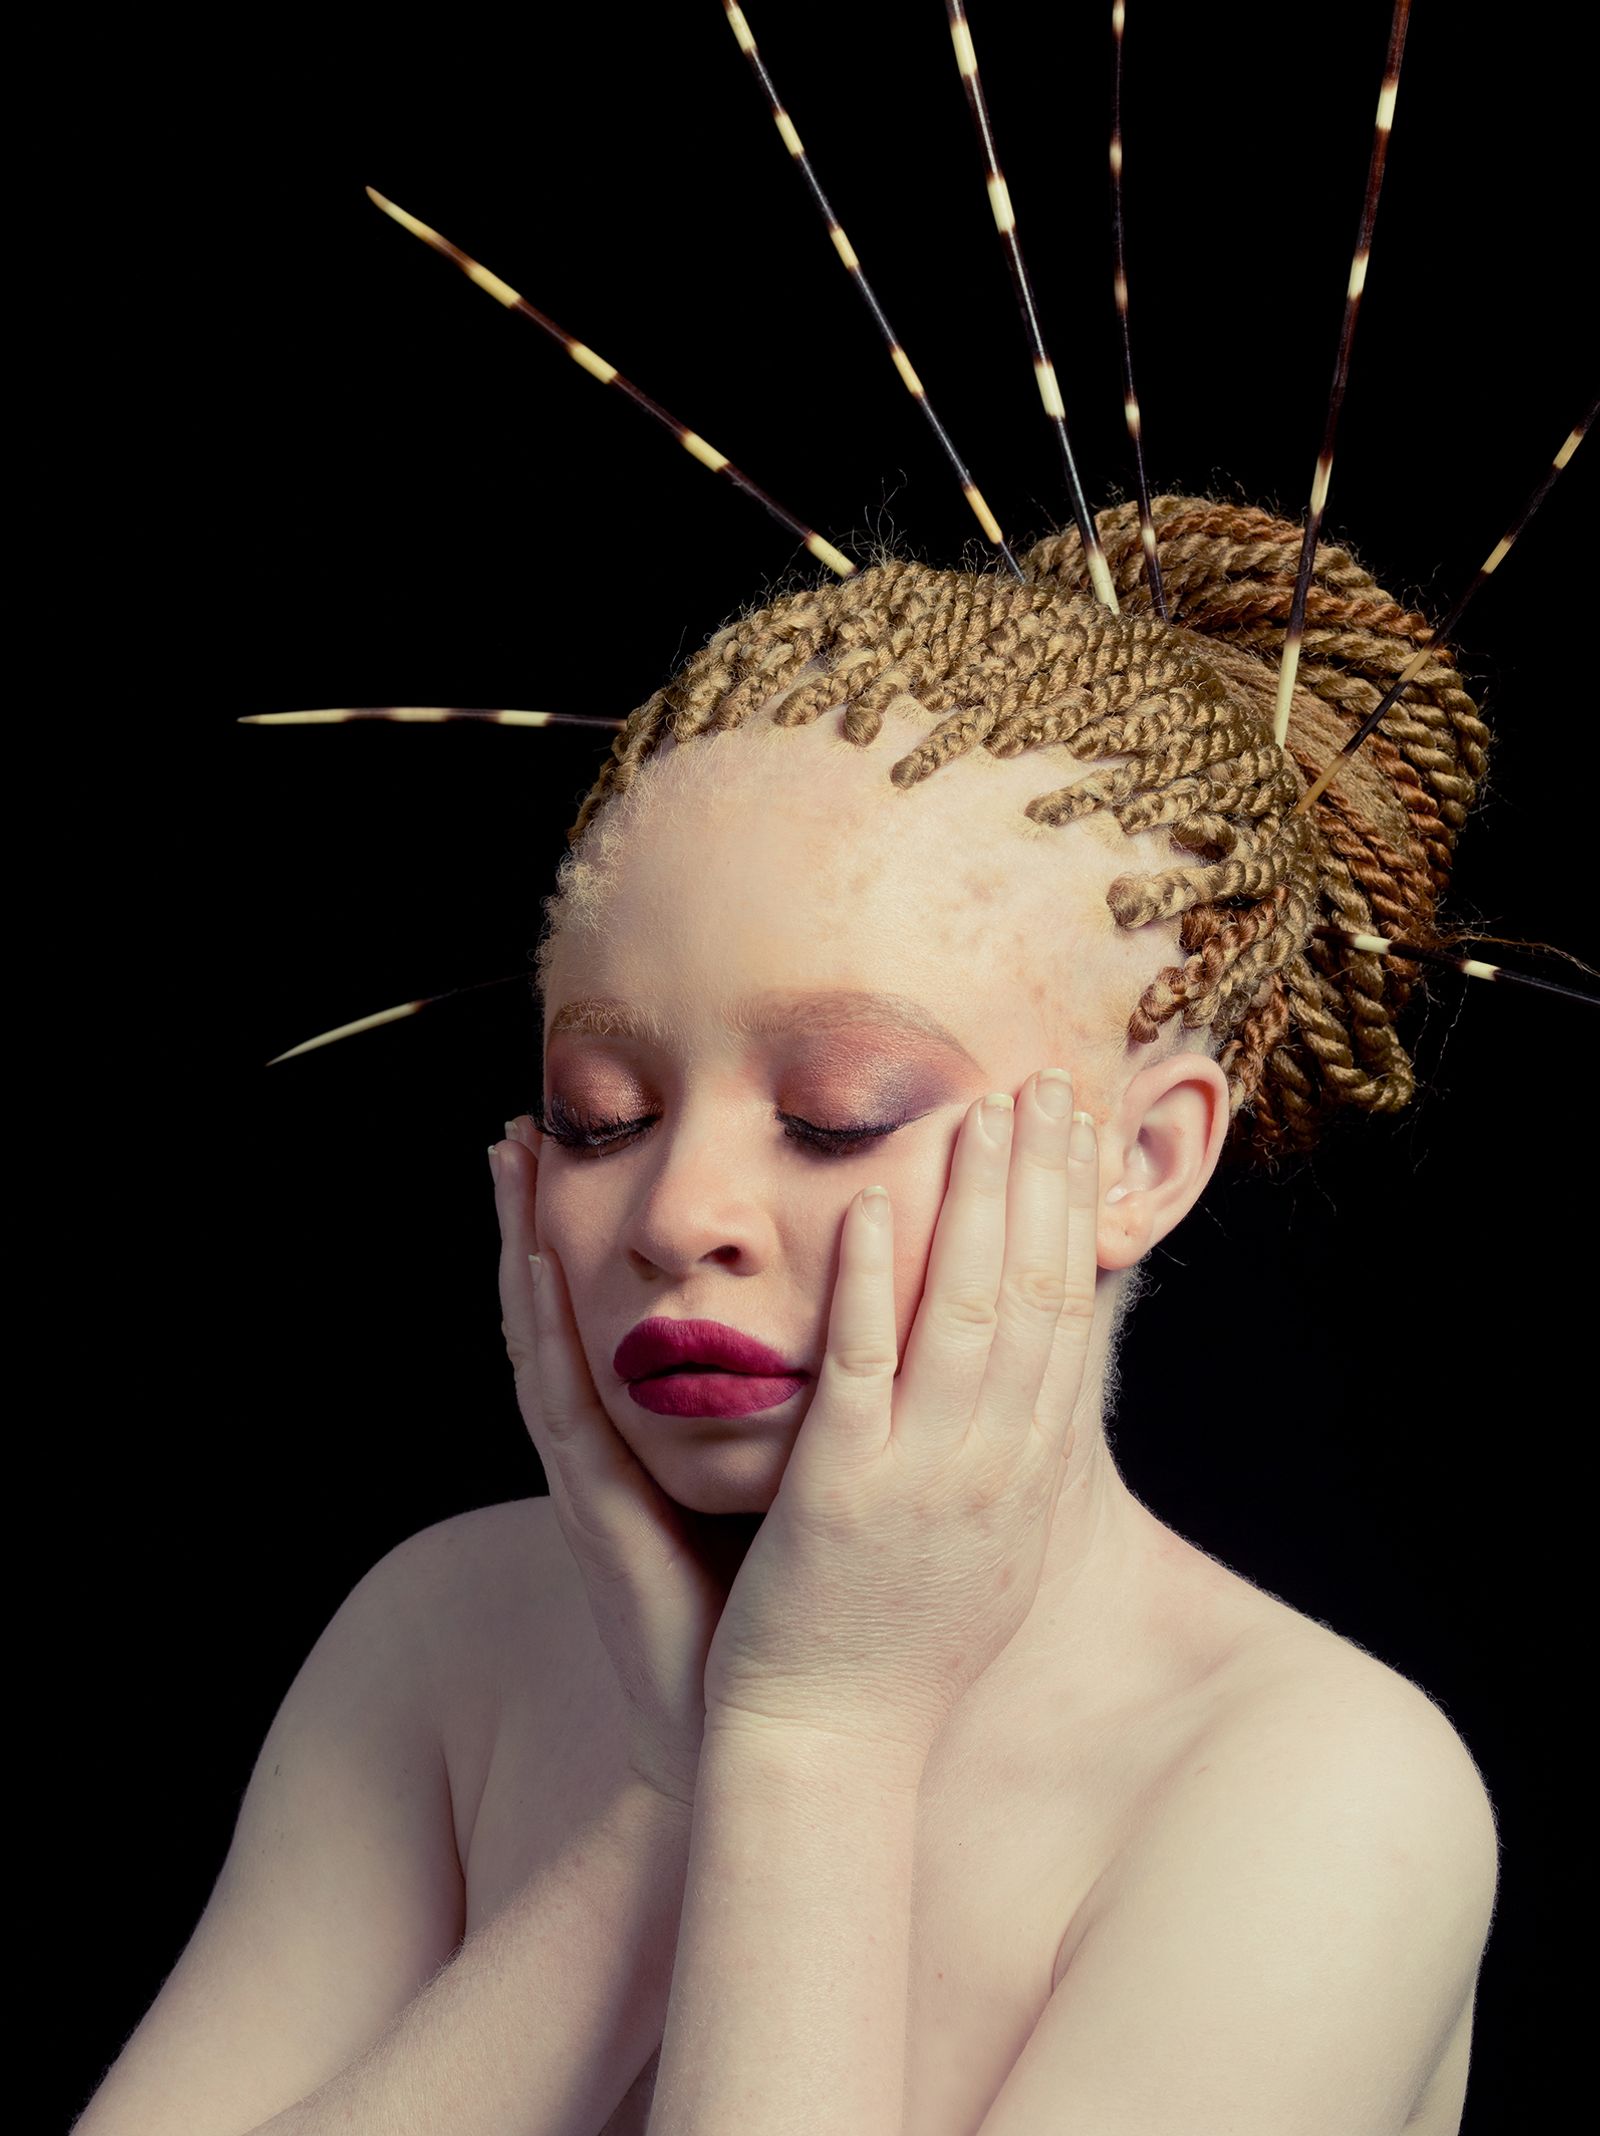 © Hannah Mentz - Image from the Miss Teen Albinism photography project